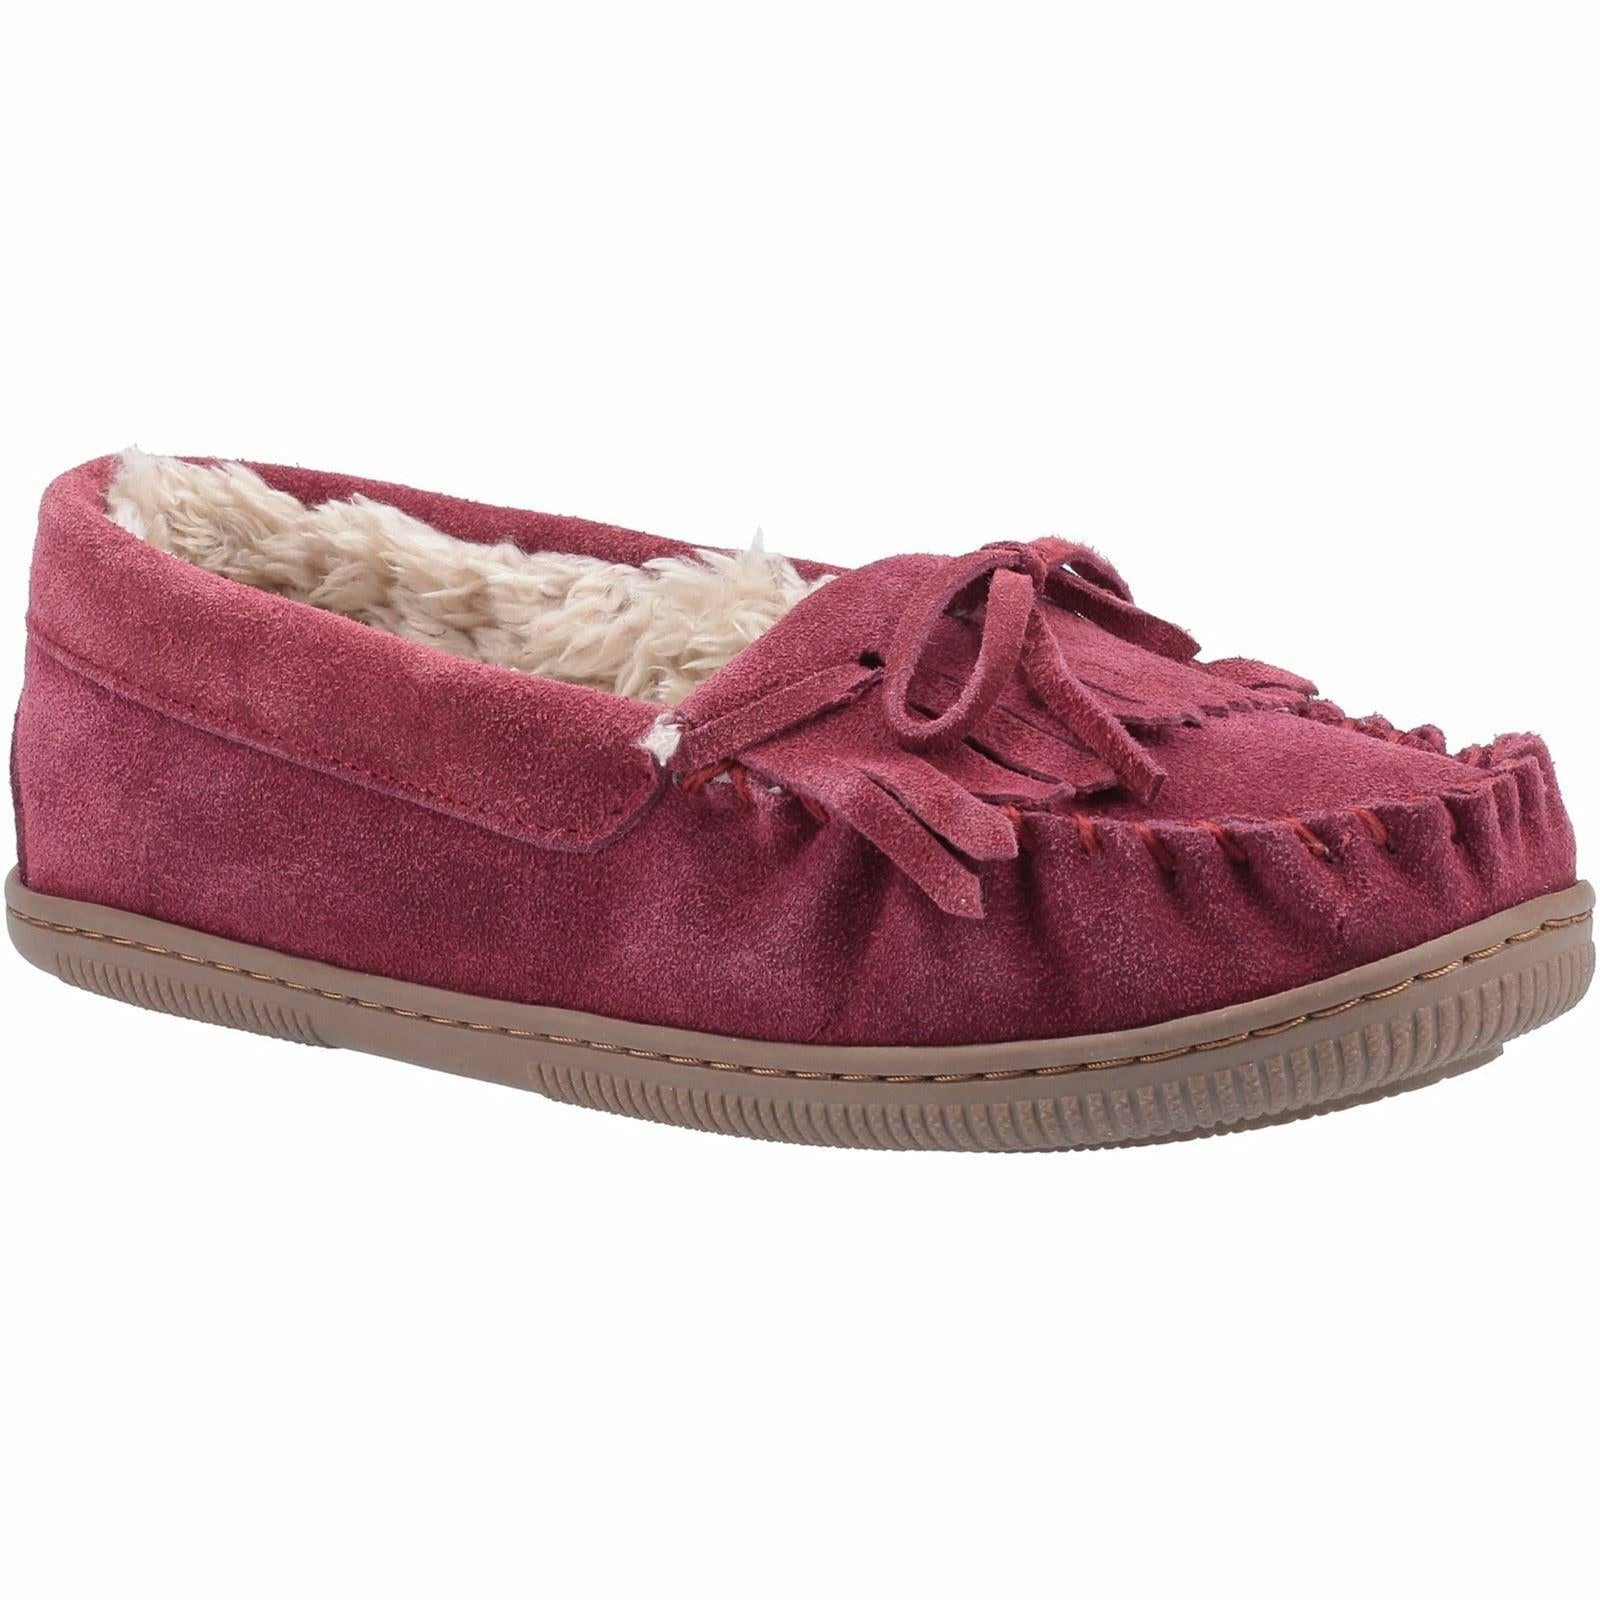 Hush Puppies Addy ladies burgundy memory foam warm fur lined moccasin slippers